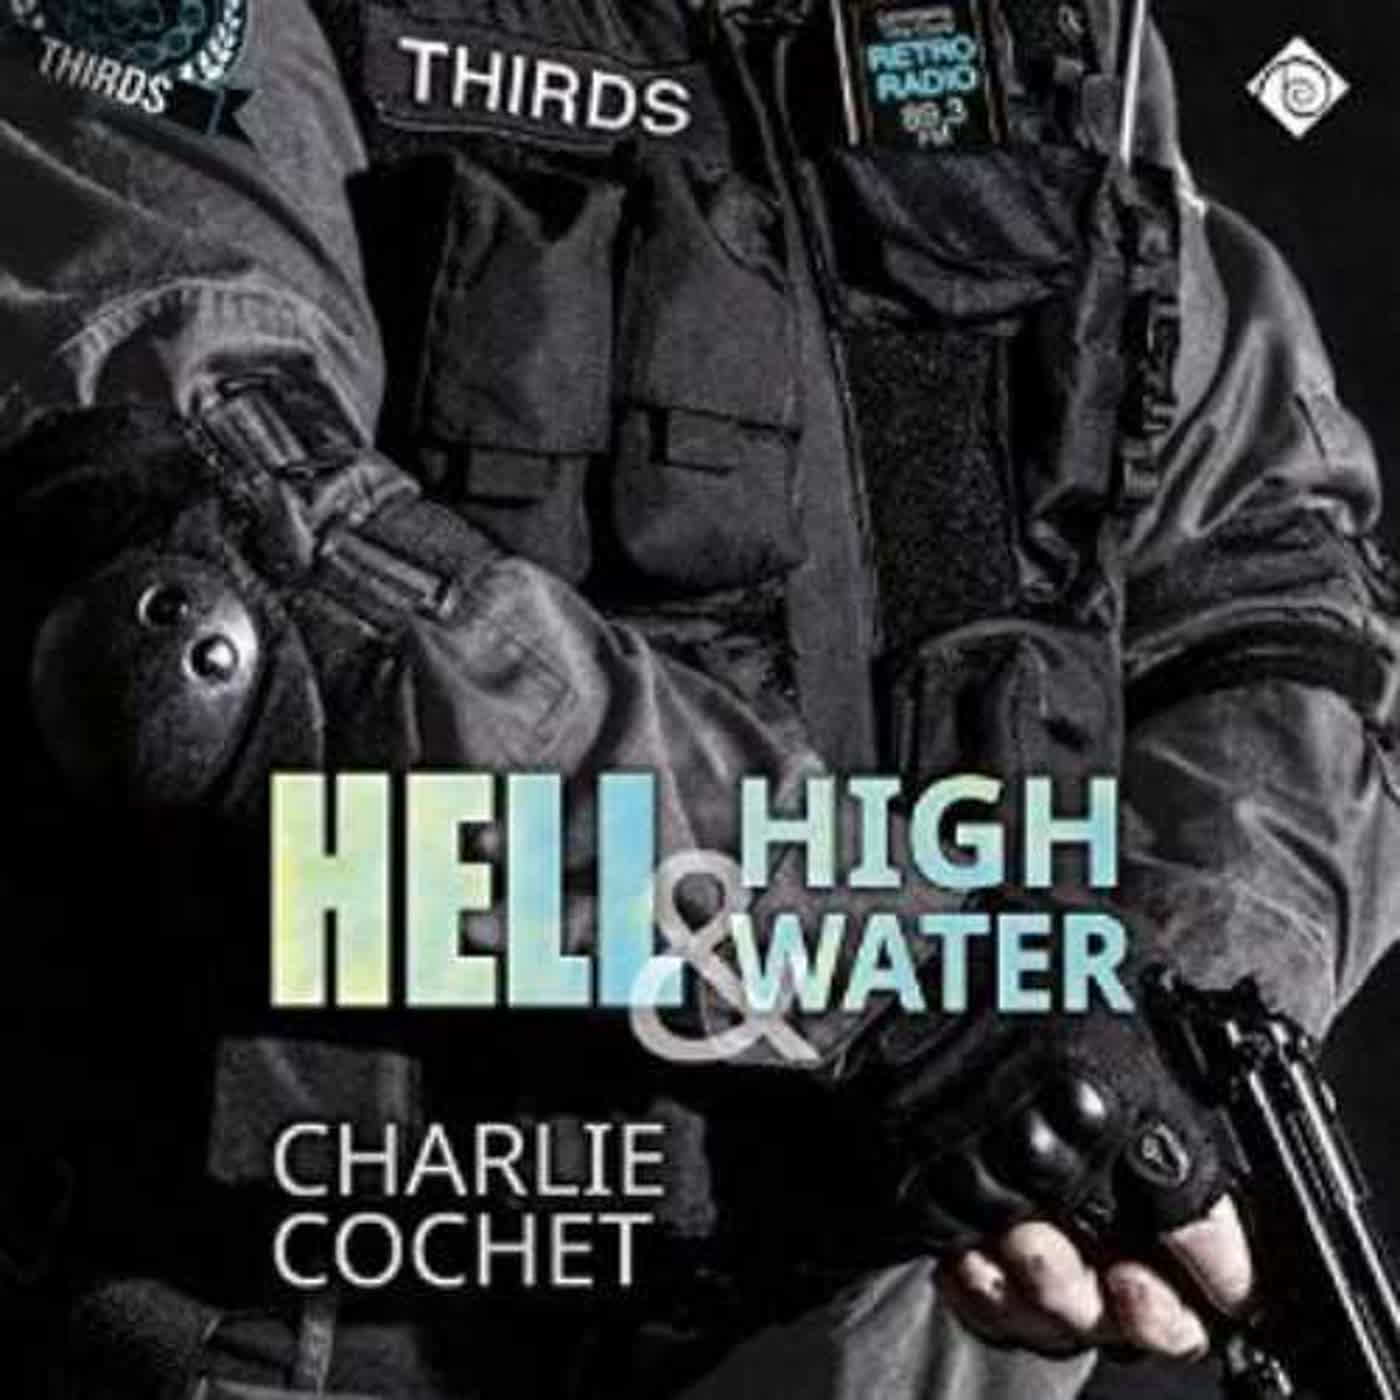 epub Download Hell & High Water (THIRDS #1) By Charlie Cochet Full Volumes